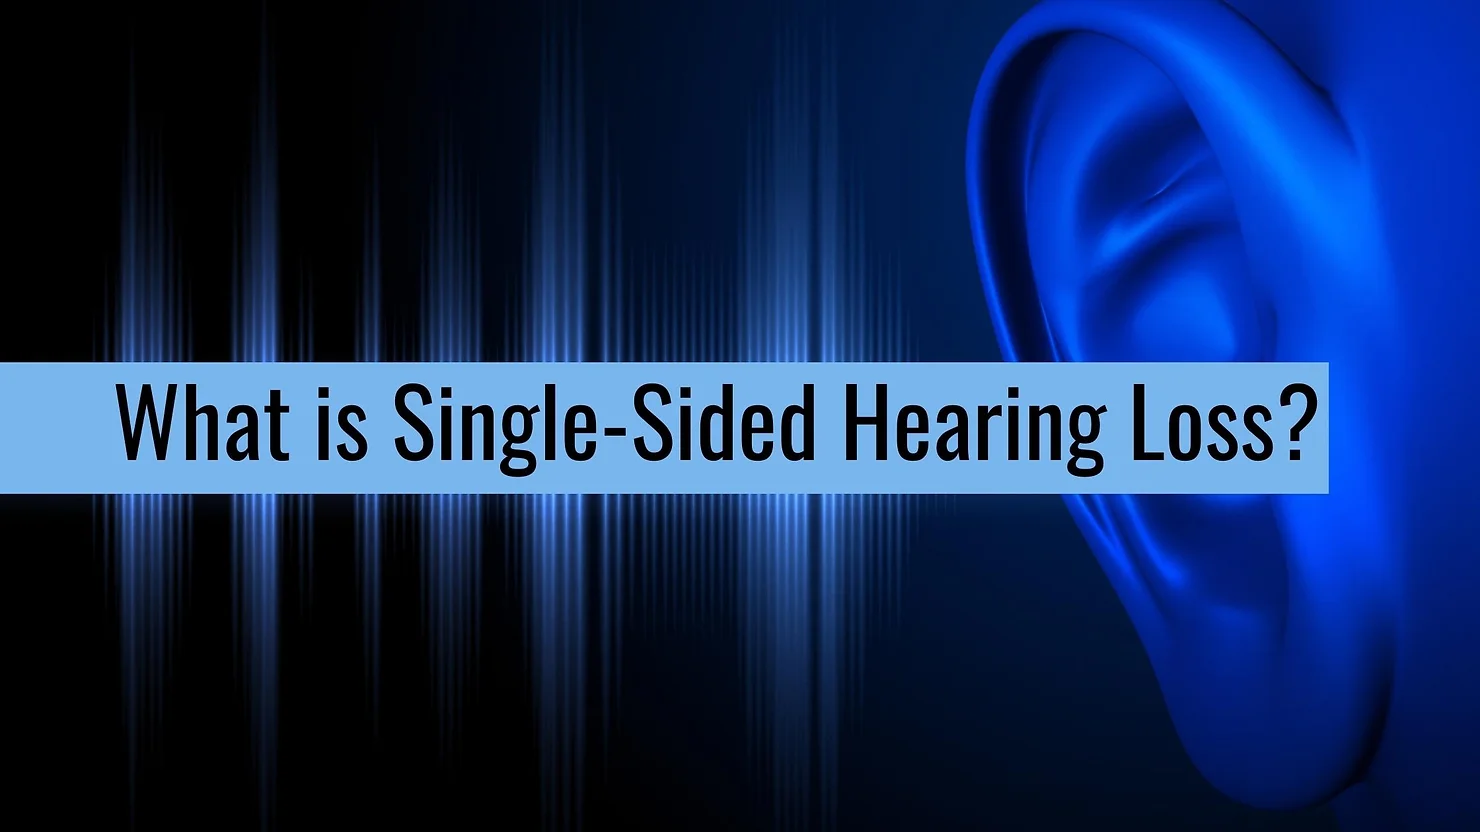 Featured image for “What Is Single-Sided Hearing Loss?”